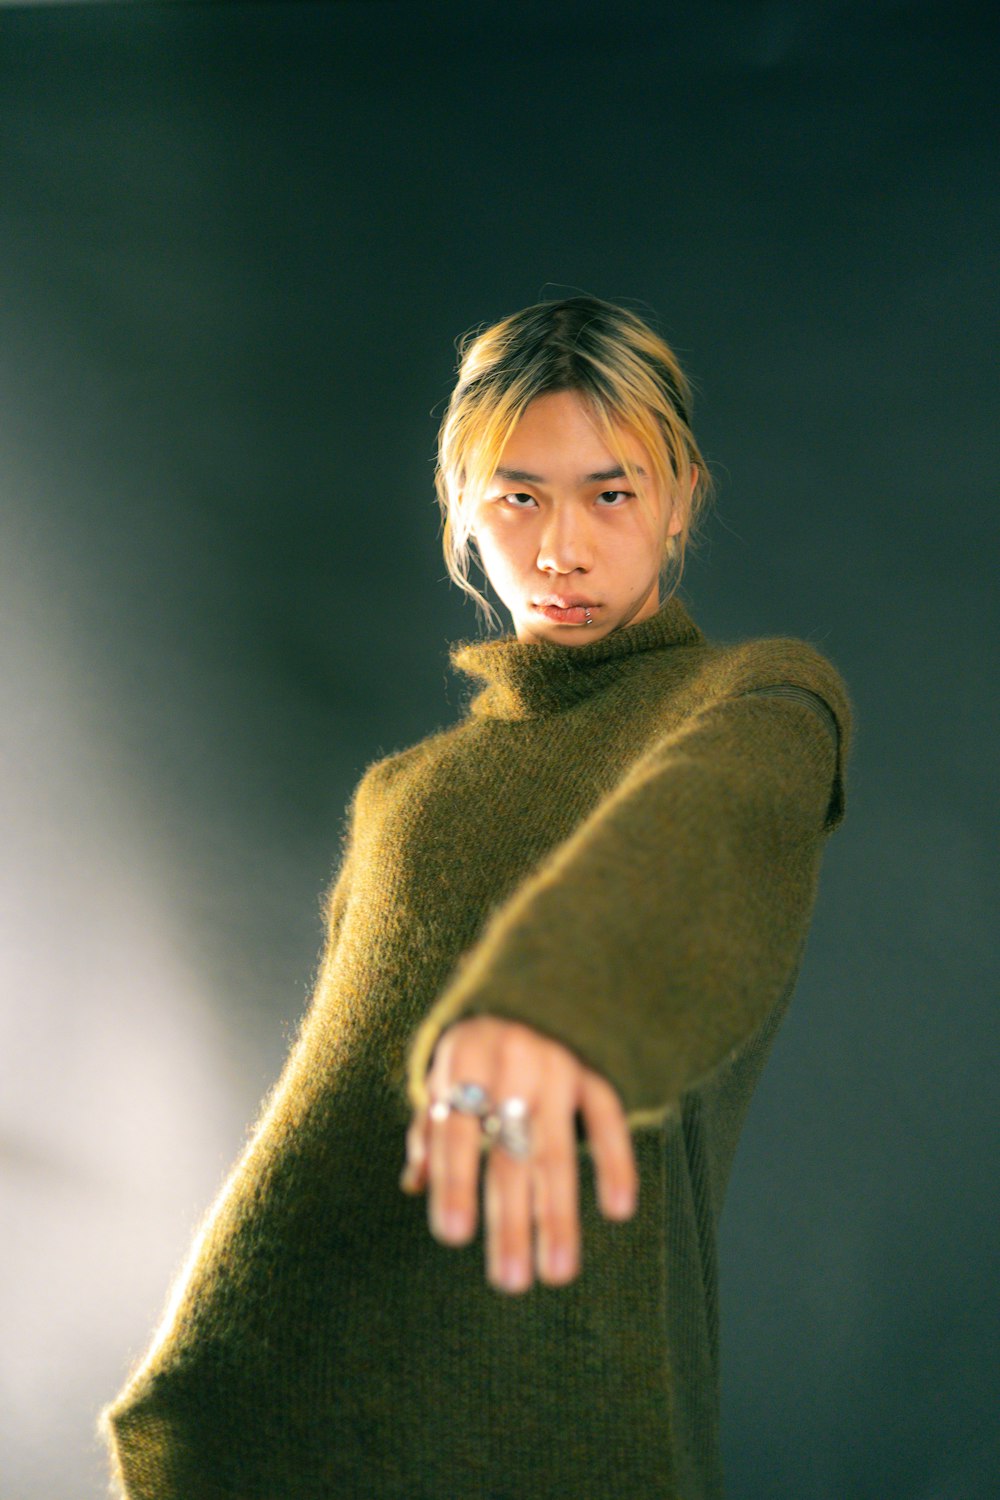 a woman in a green sweater pointing at the camera